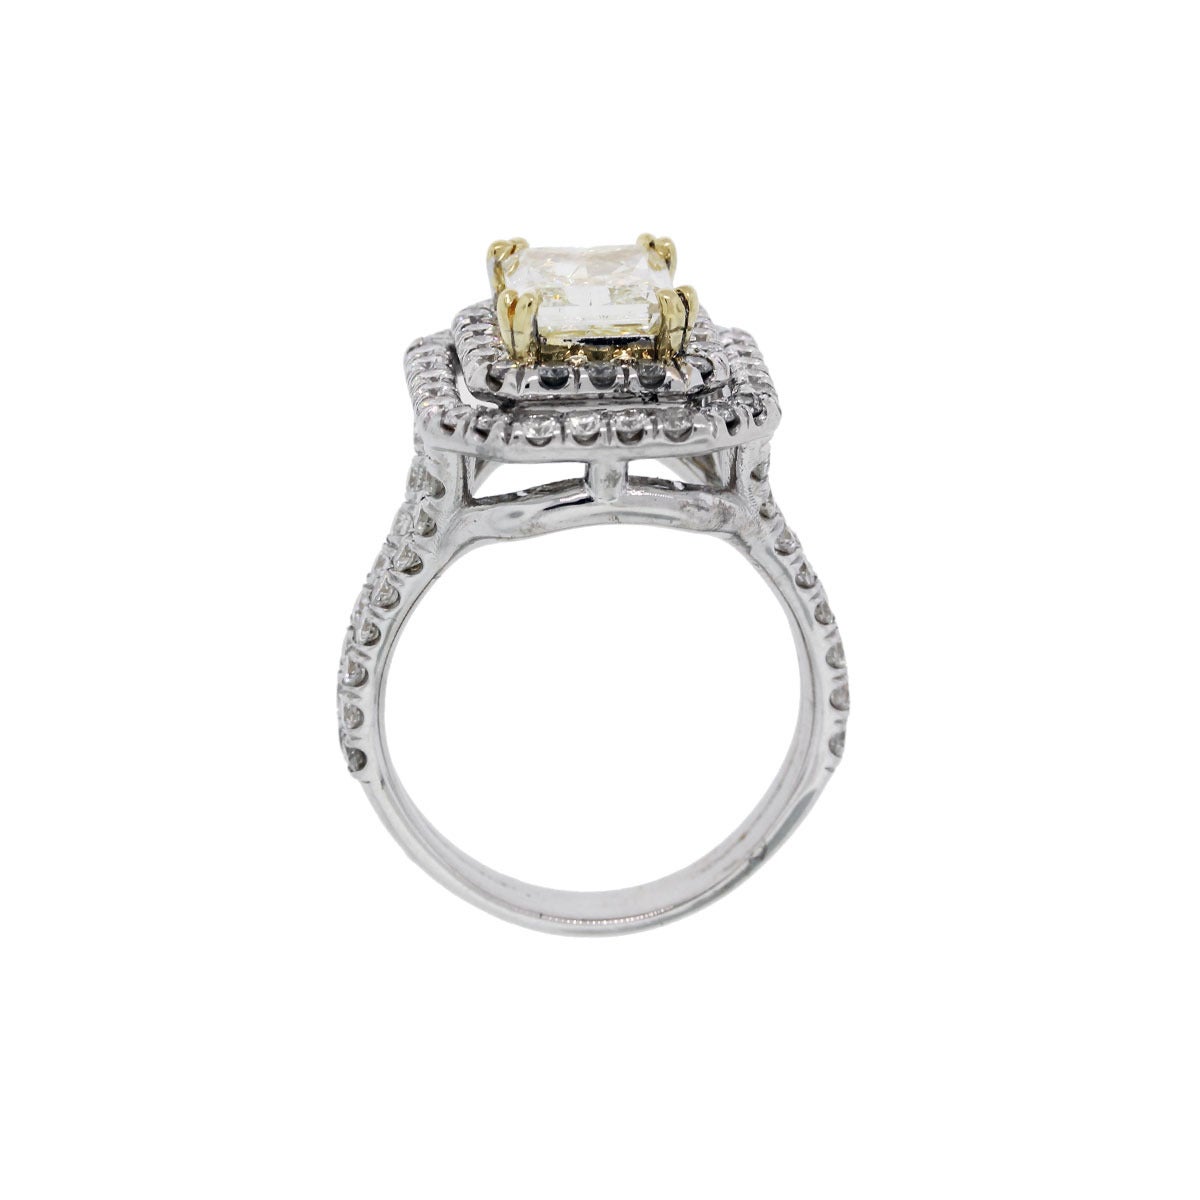 Style: Radiant Fancy Light Yellow 3ctw Diamond Ring
Material :14k White Gold, Mounting is 18k Yellow Gold
Ring Size : 9.25(can be sized)
Diamond Details :Approximately 3ctw of Radiant Cut Diamonds that are G in Color and VS in clarity.
Total